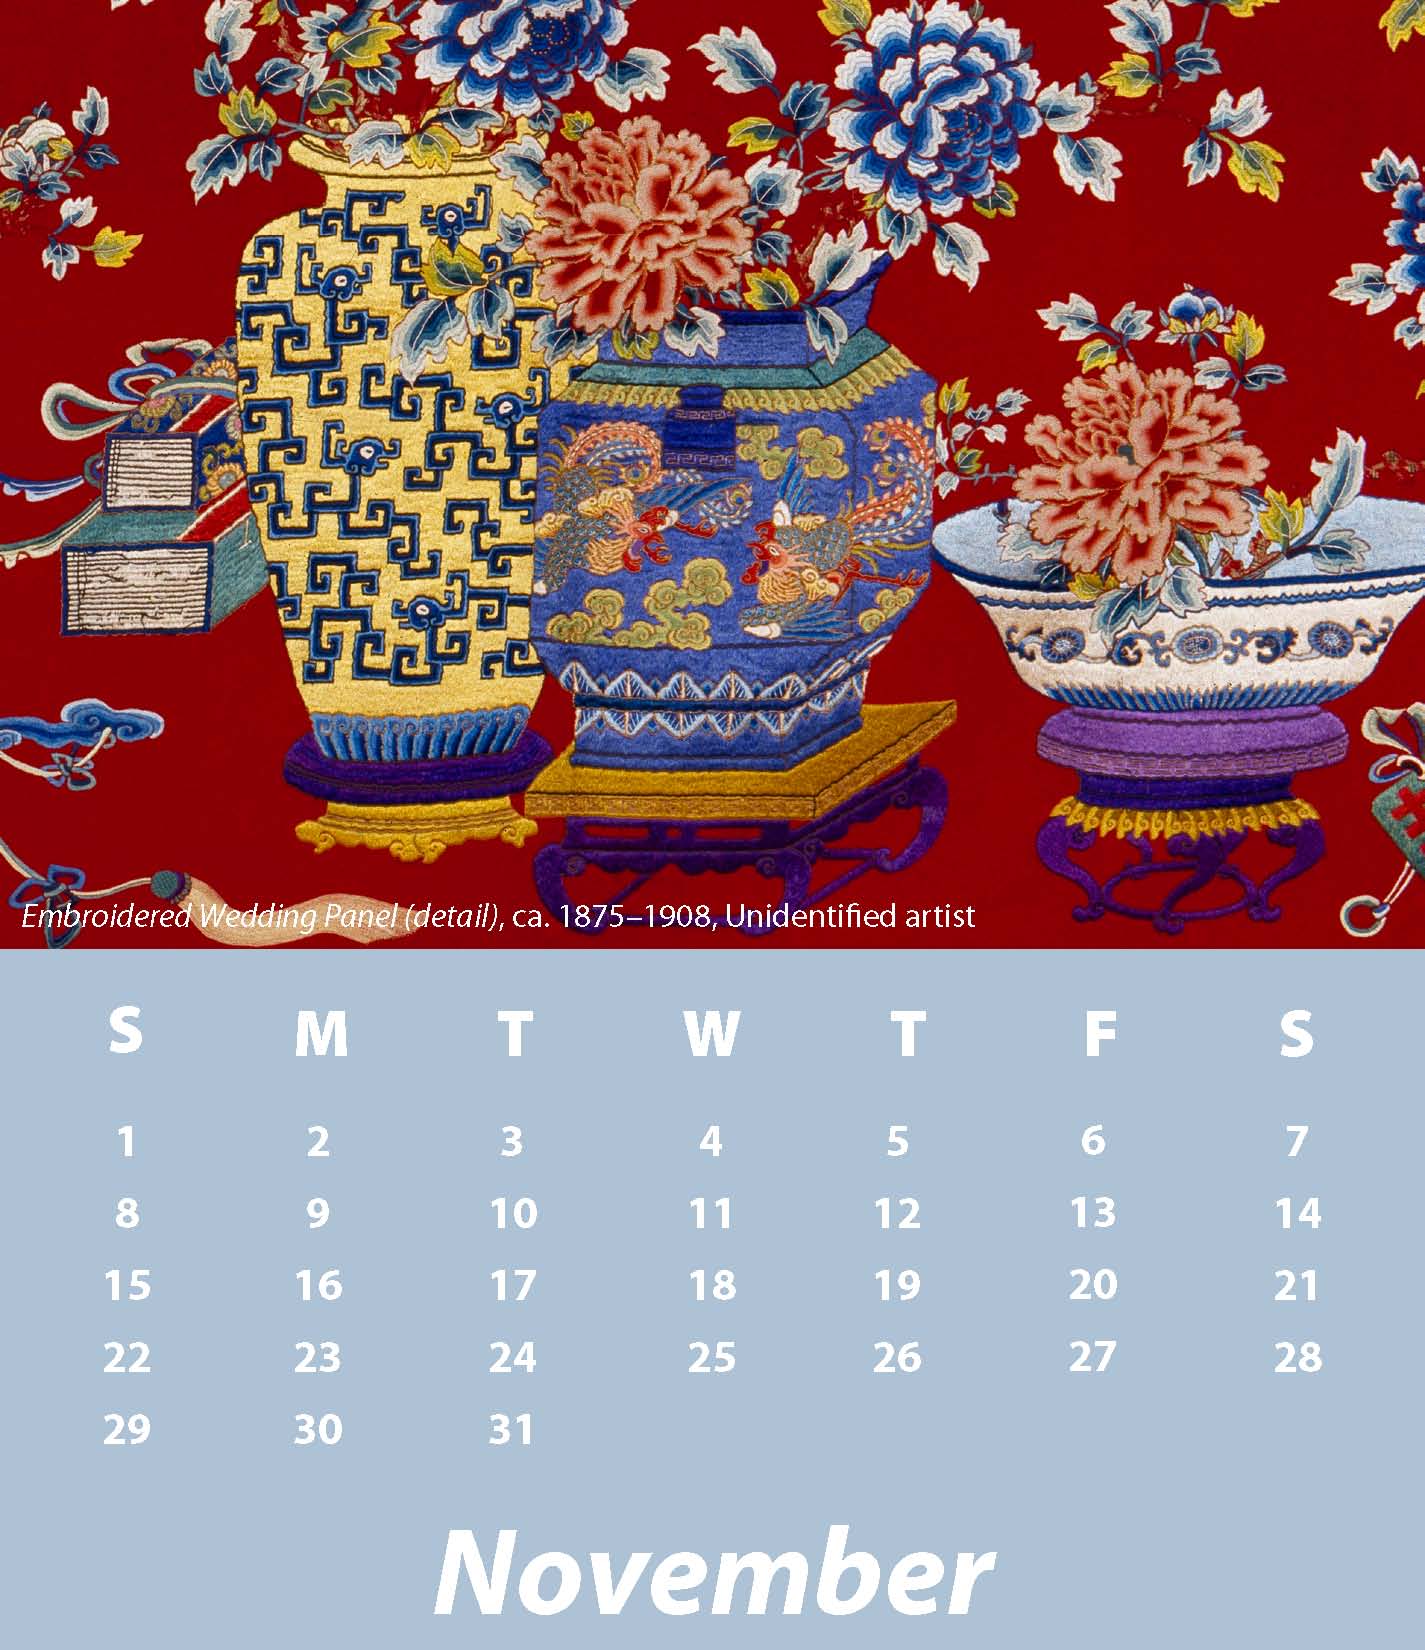 a November calendar with the image Embroidered Wedding Panel